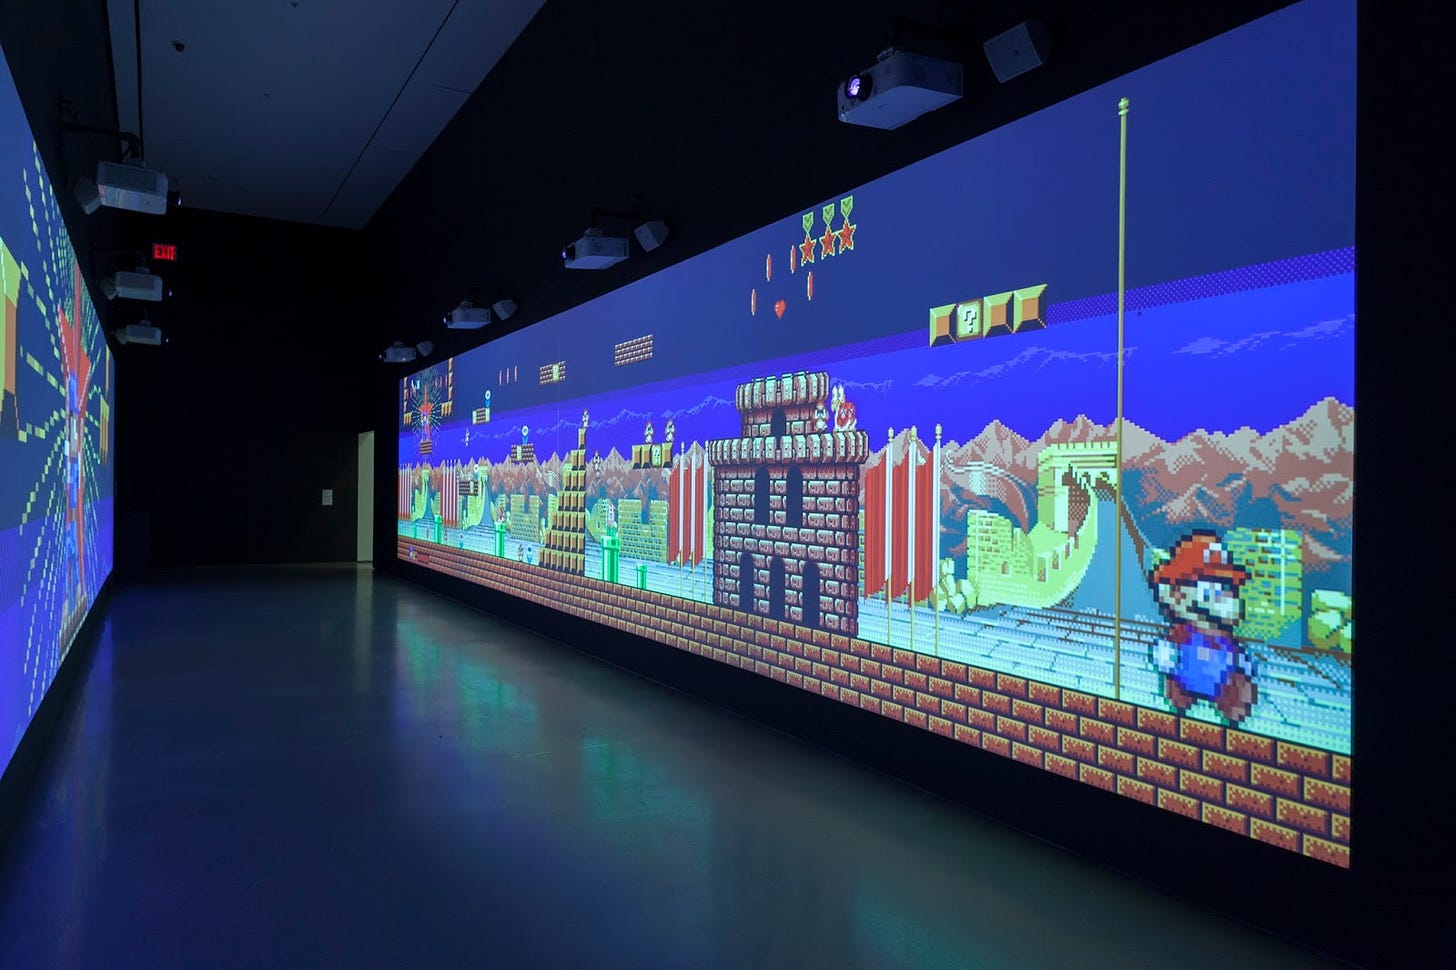 The Evolution of Video Games as Art in the MoMA